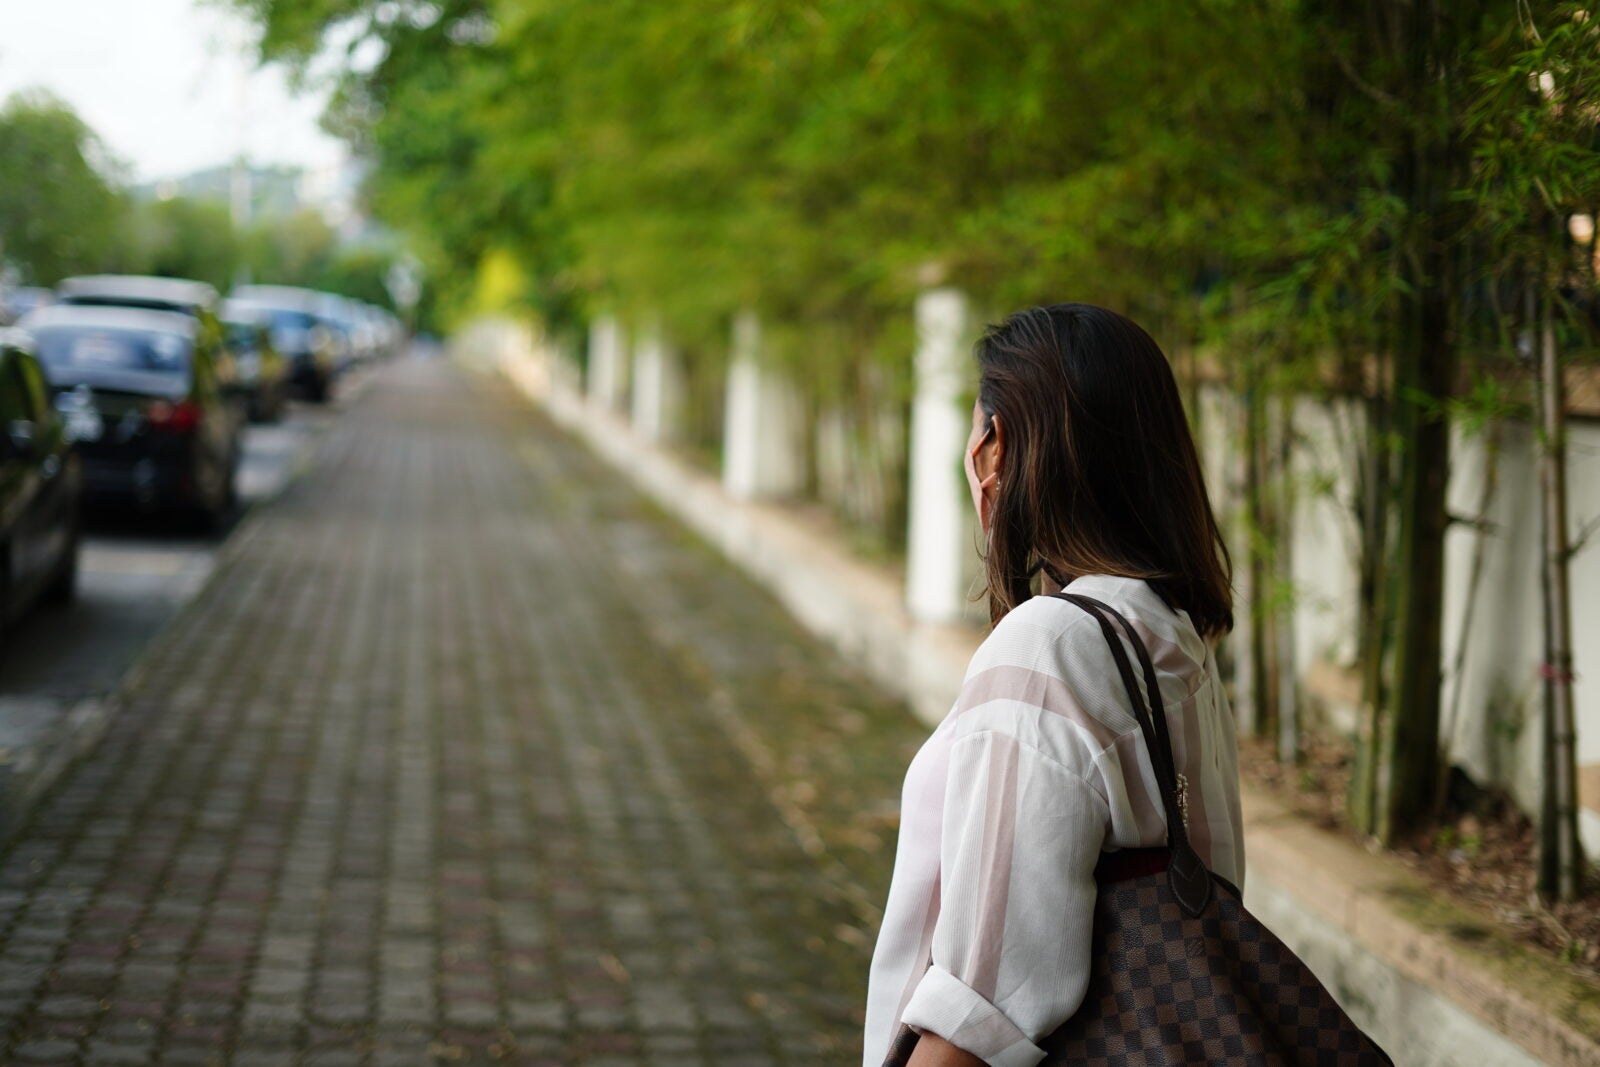 Woman wearing white blouse standing on the sidewalk and looking behind her.